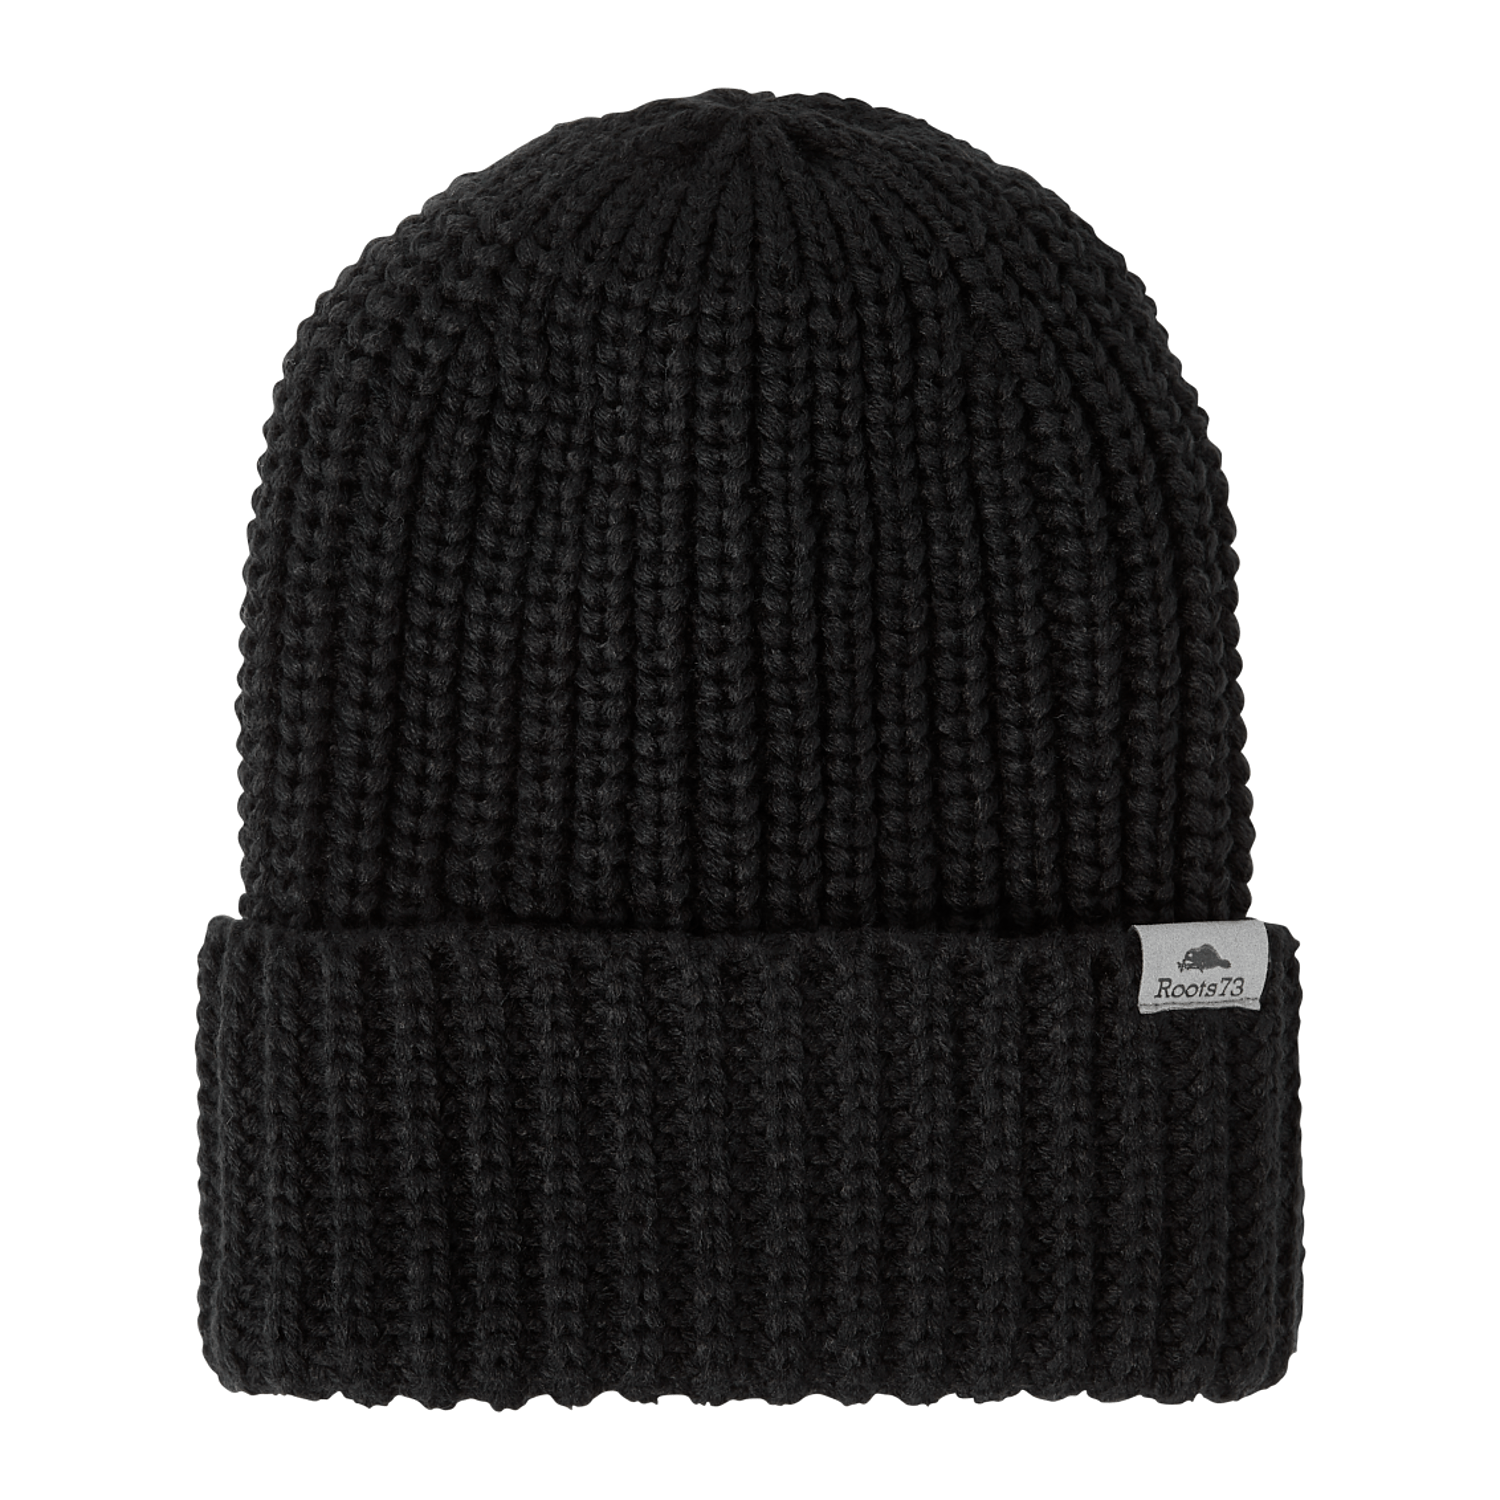 Roots Headwear One Size / Black Roots73 - SHELTY Knit Beanie